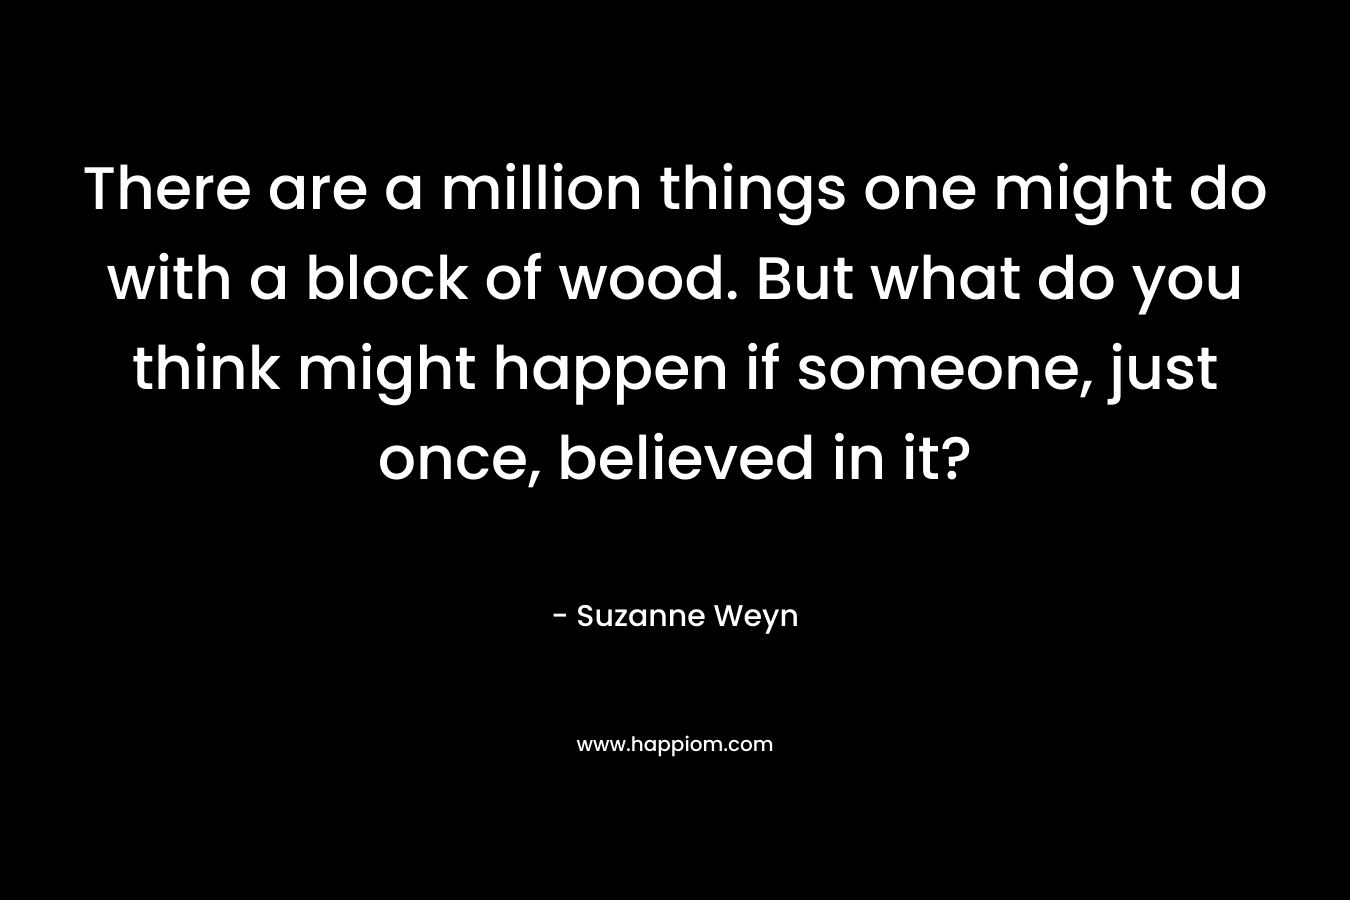 There are a million things one might do with a block of wood. But what do you think might happen if someone, just once, believed in it?